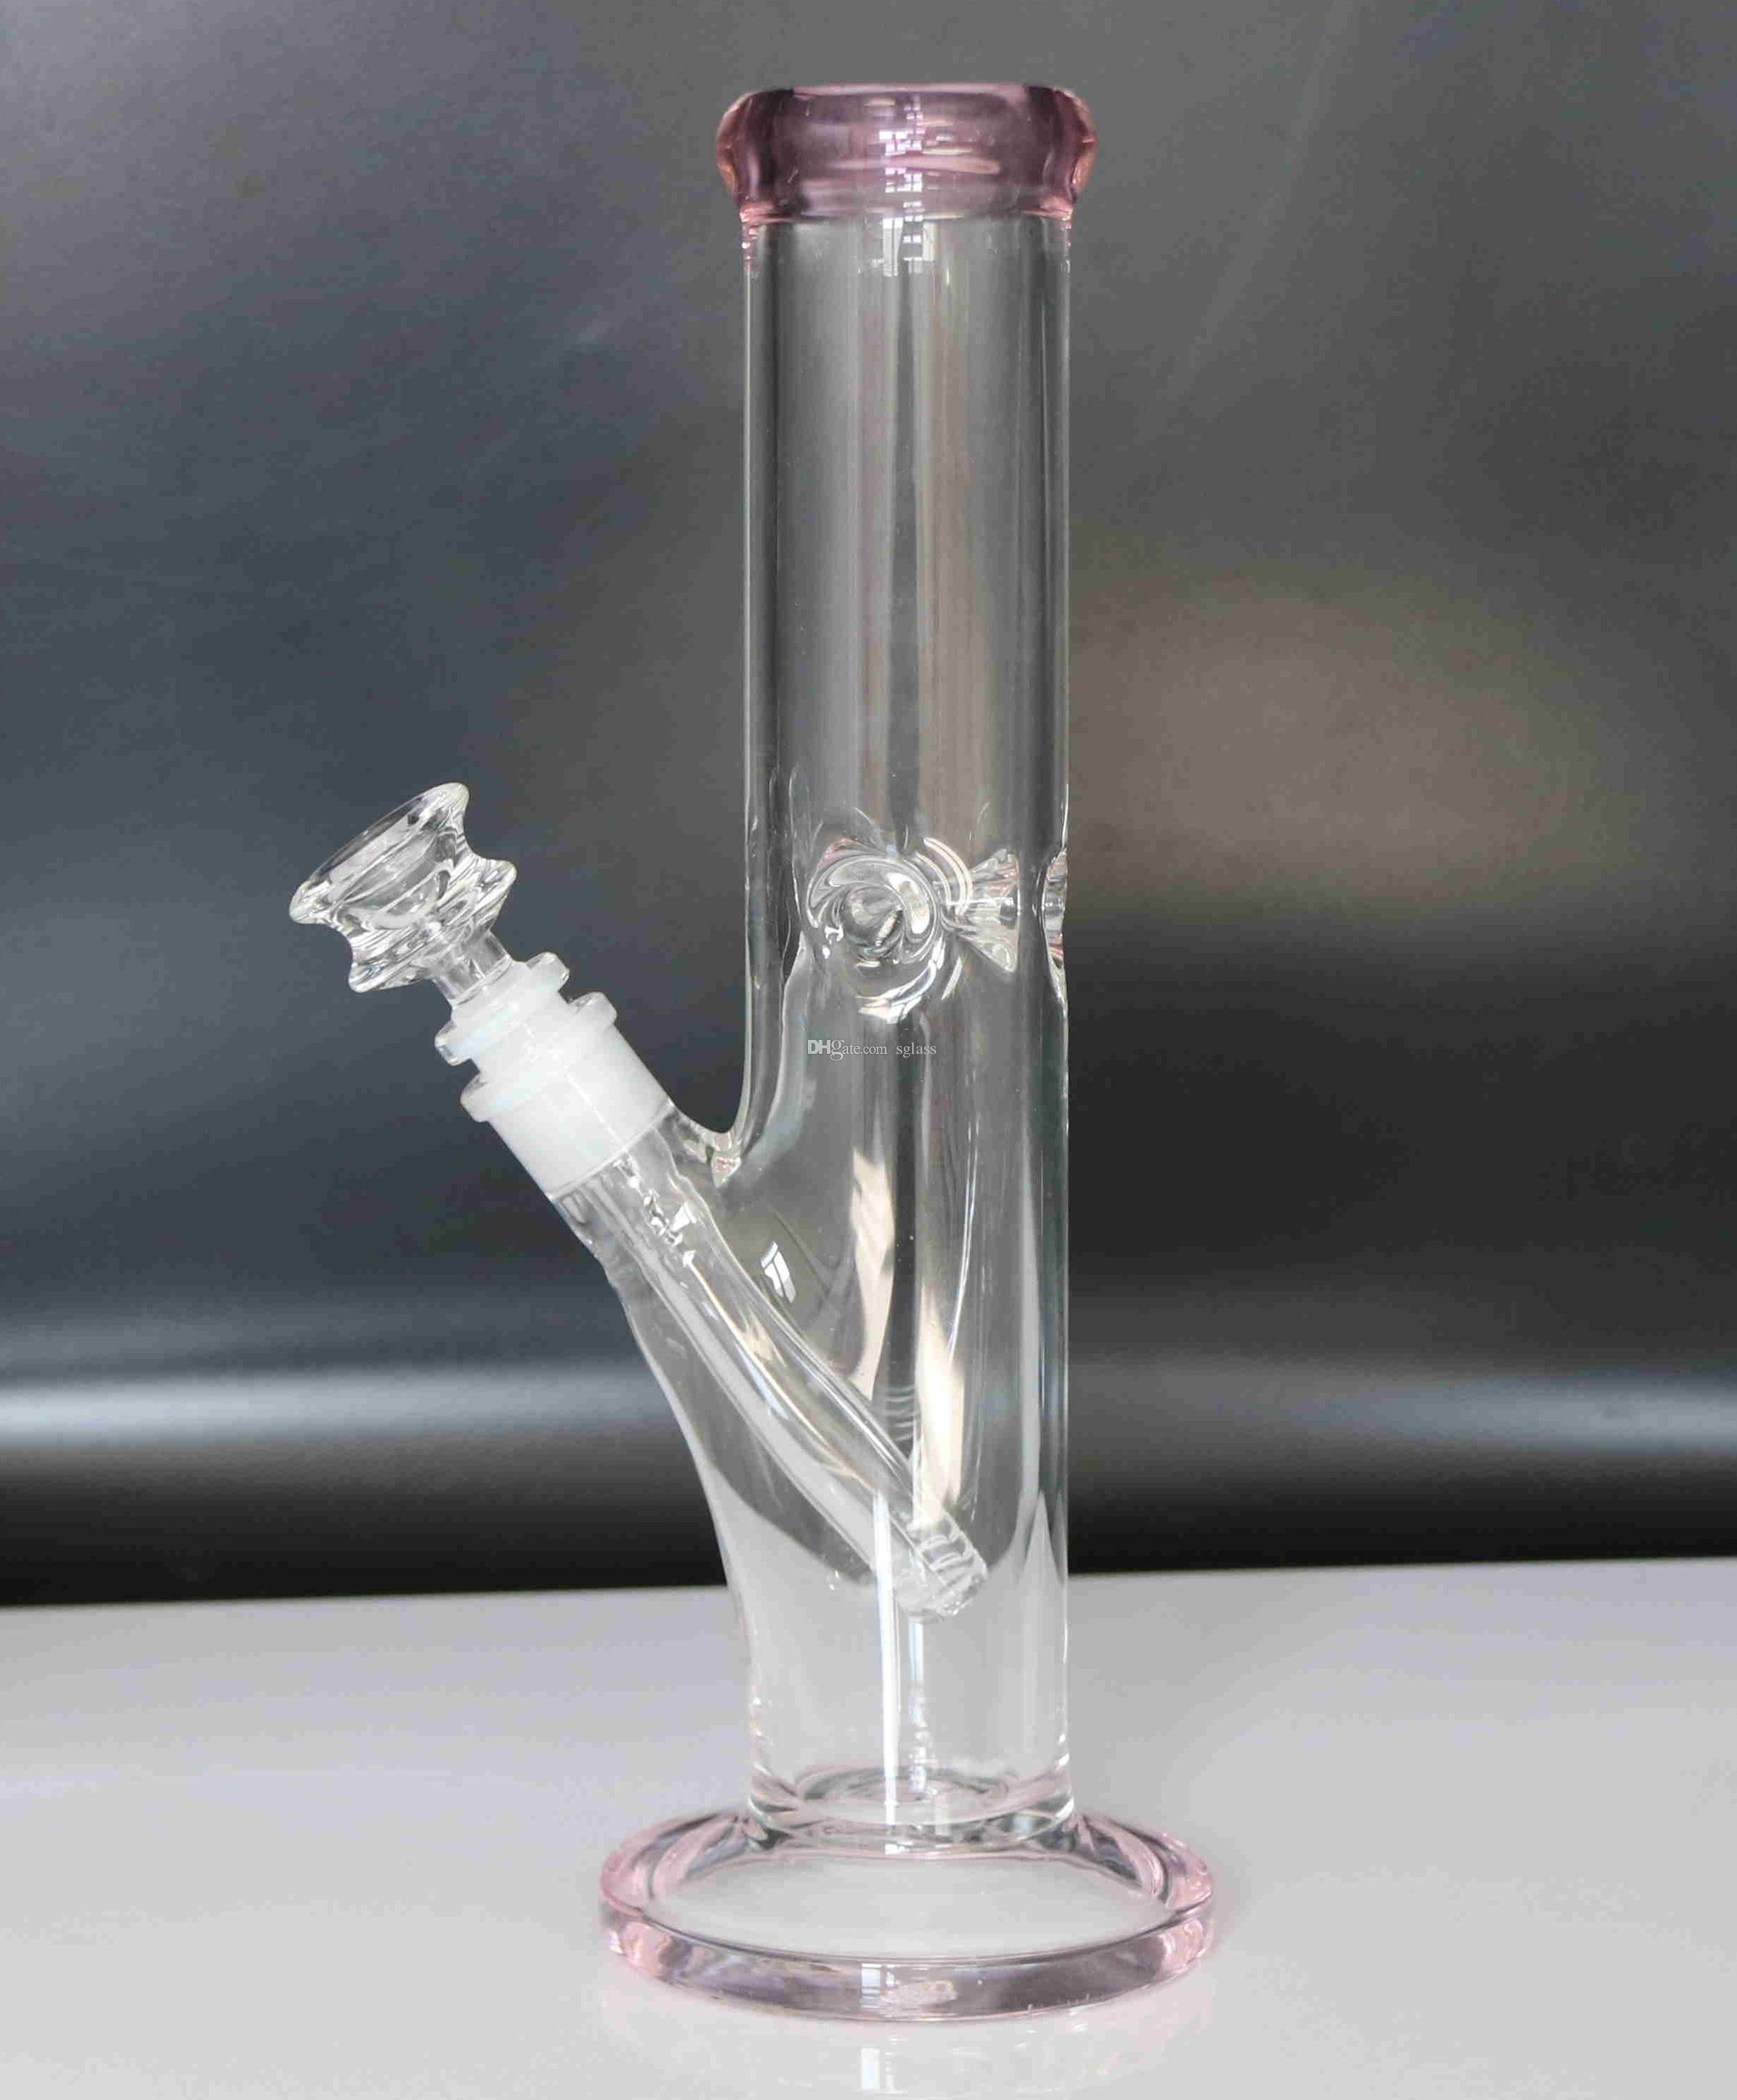 10 Perfect 18 Inch Vases In Bulk 2024 free download 18 inch vases in bulk of 2018 7 mm thick glass bong 12 inch 18 mm joint thick and heacy in 2018 7 mm thick glass bong 12 inch 18 mm joint thick and heacy glass bong foam packing with carton 